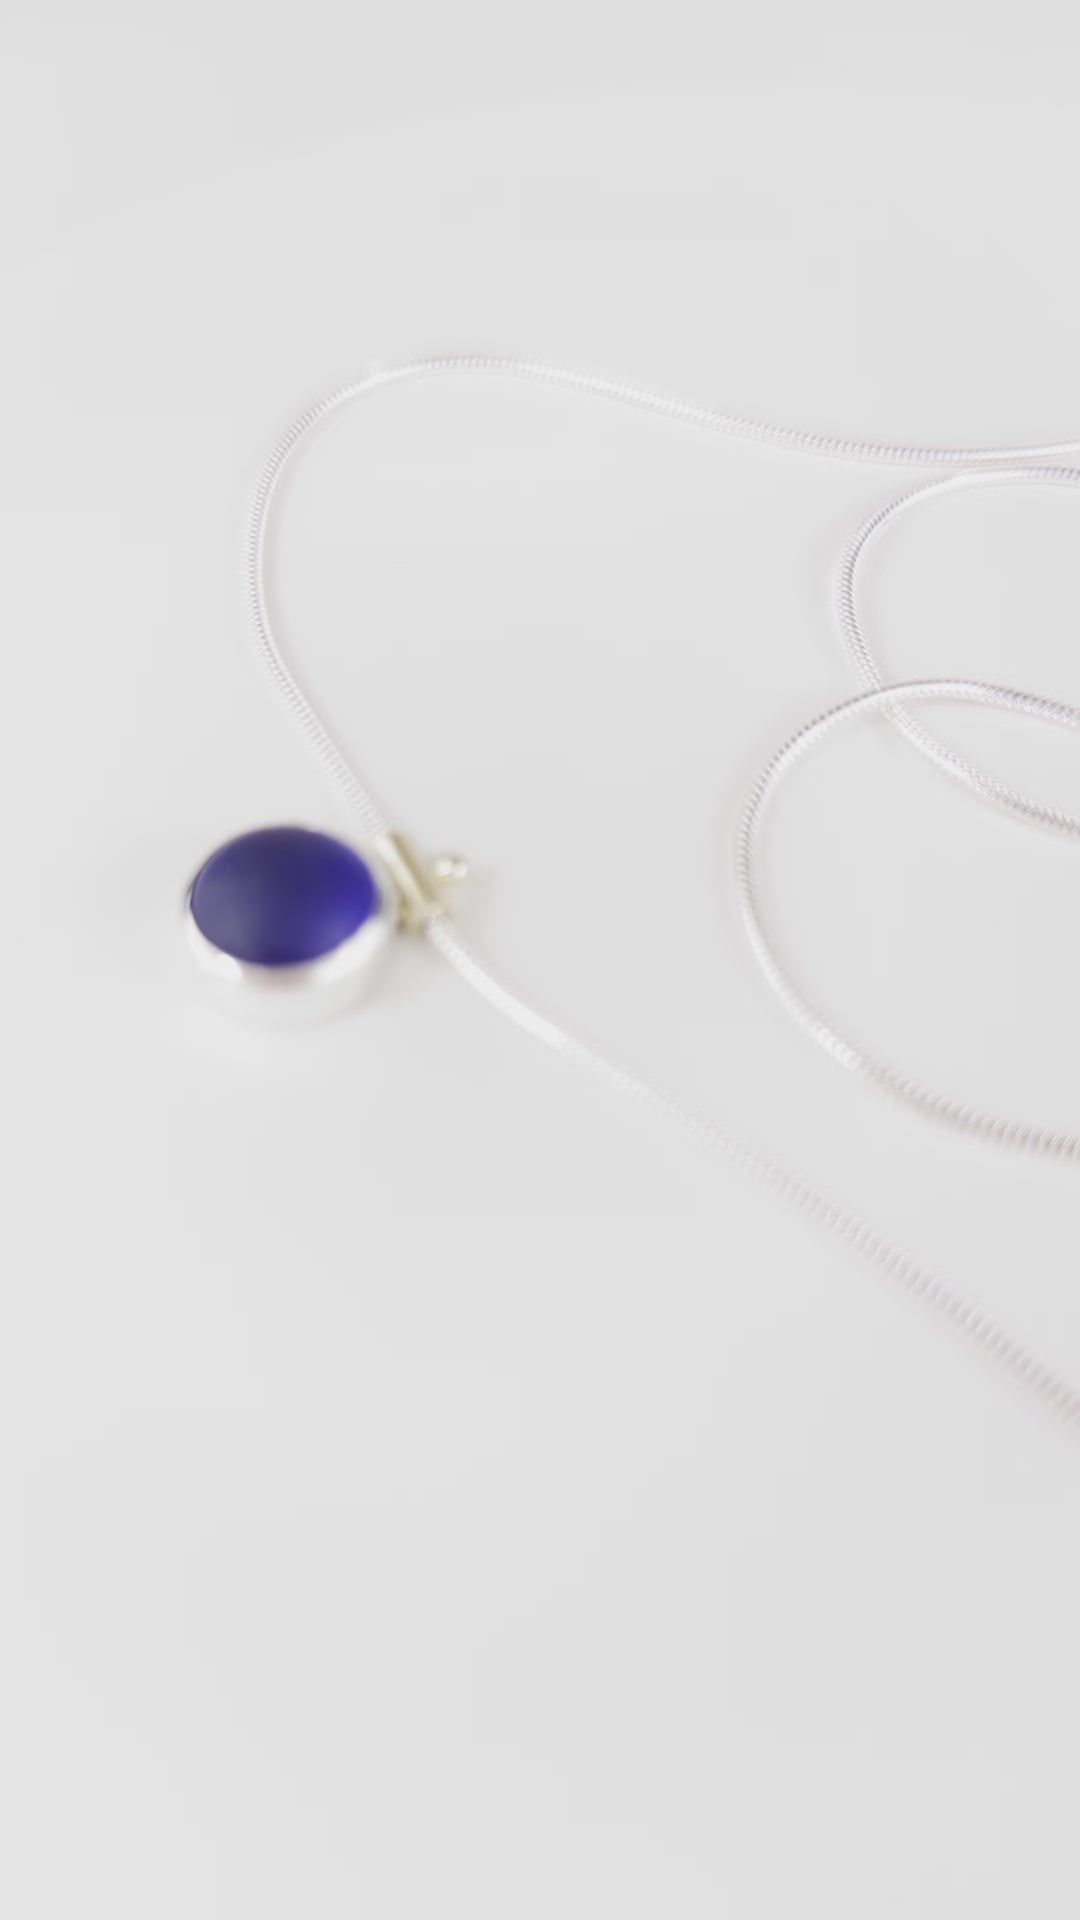 video of spinning deep blue cobalt sea glass necklace with silver snake chain